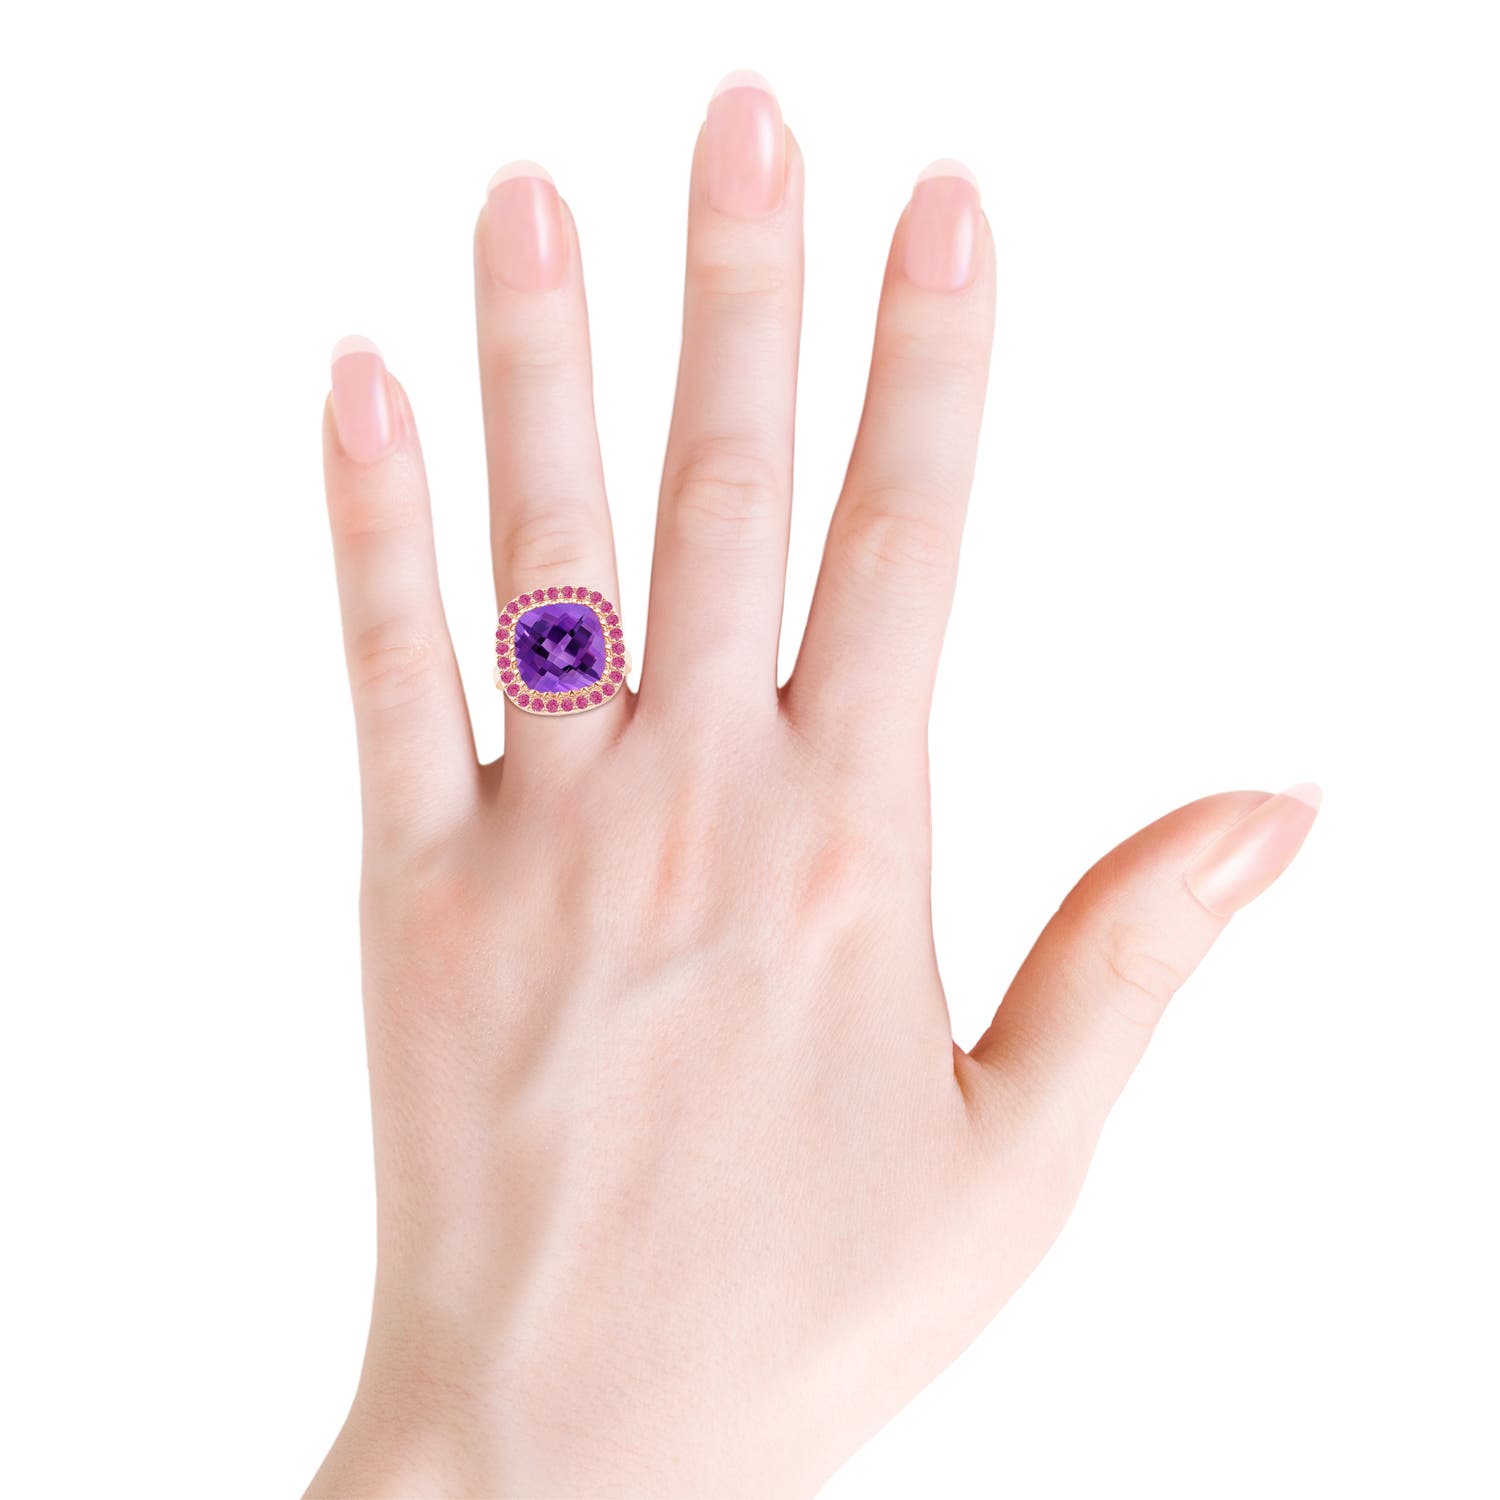 AAA - Amethyst / 6.98 CT / 14 KT Rose Gold